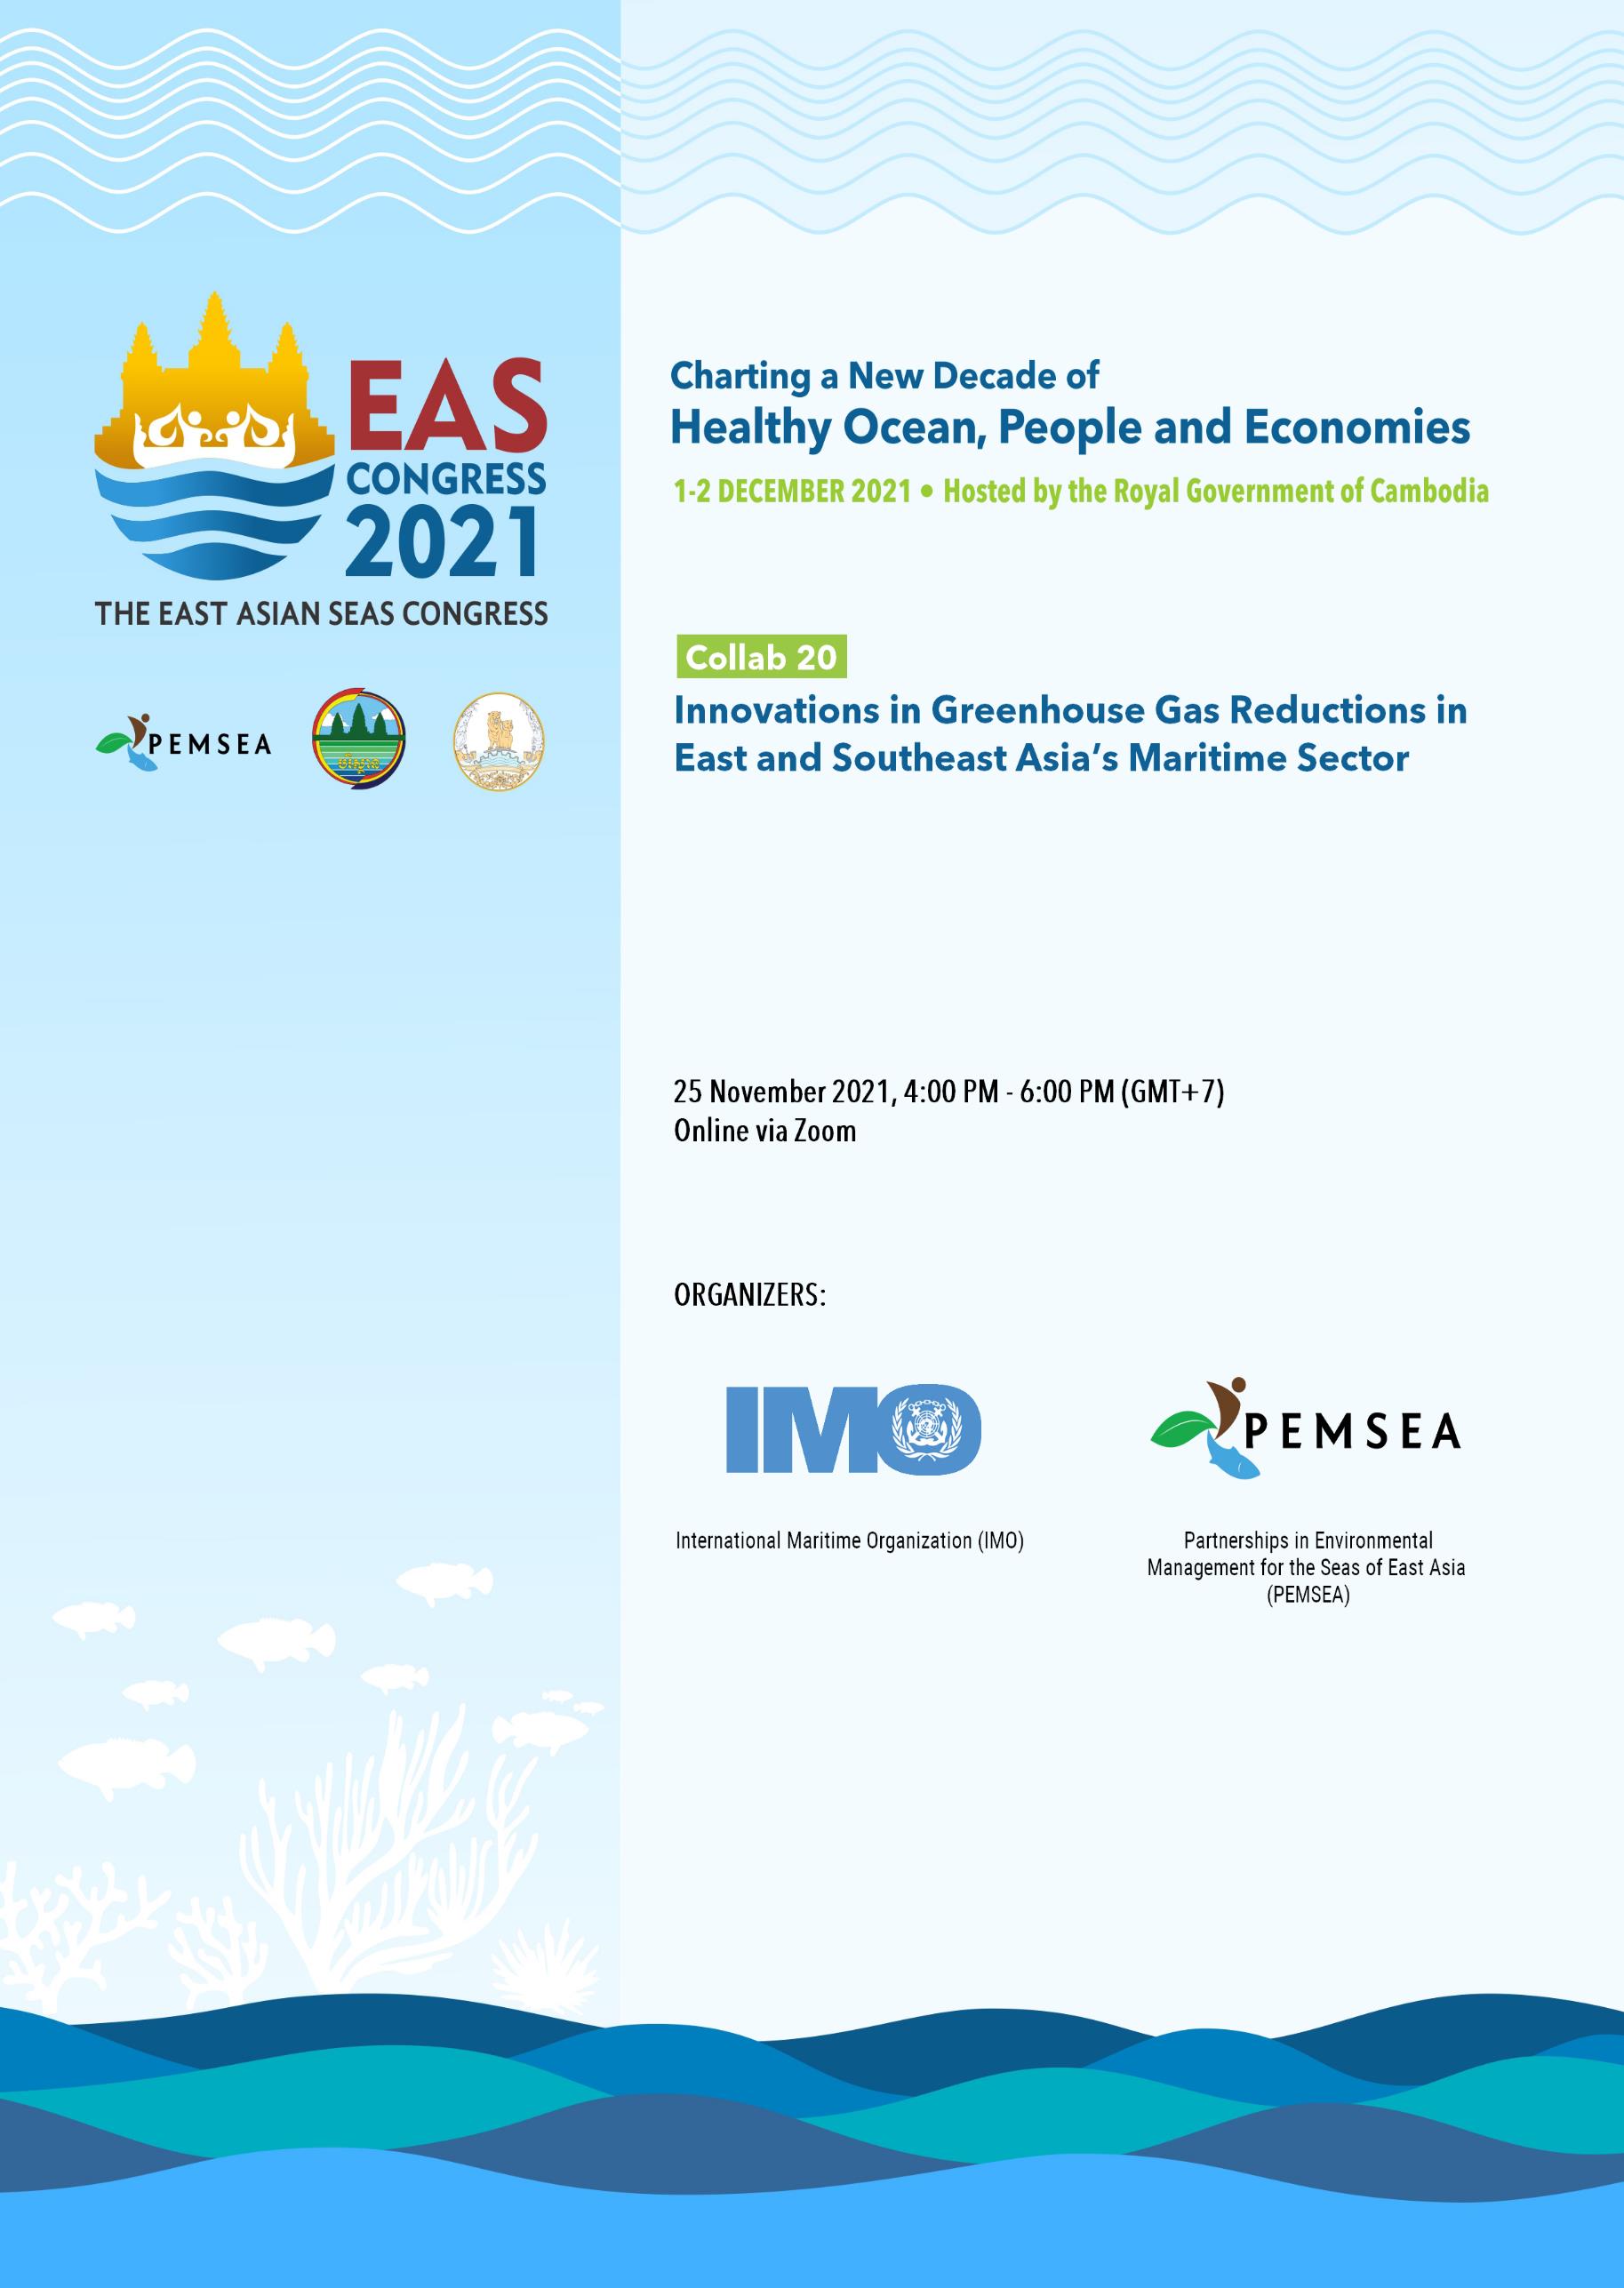 Collab 20 Innovations in Greenhouse Gas Reductions in East and Southeast Asia’s Maritime Sector